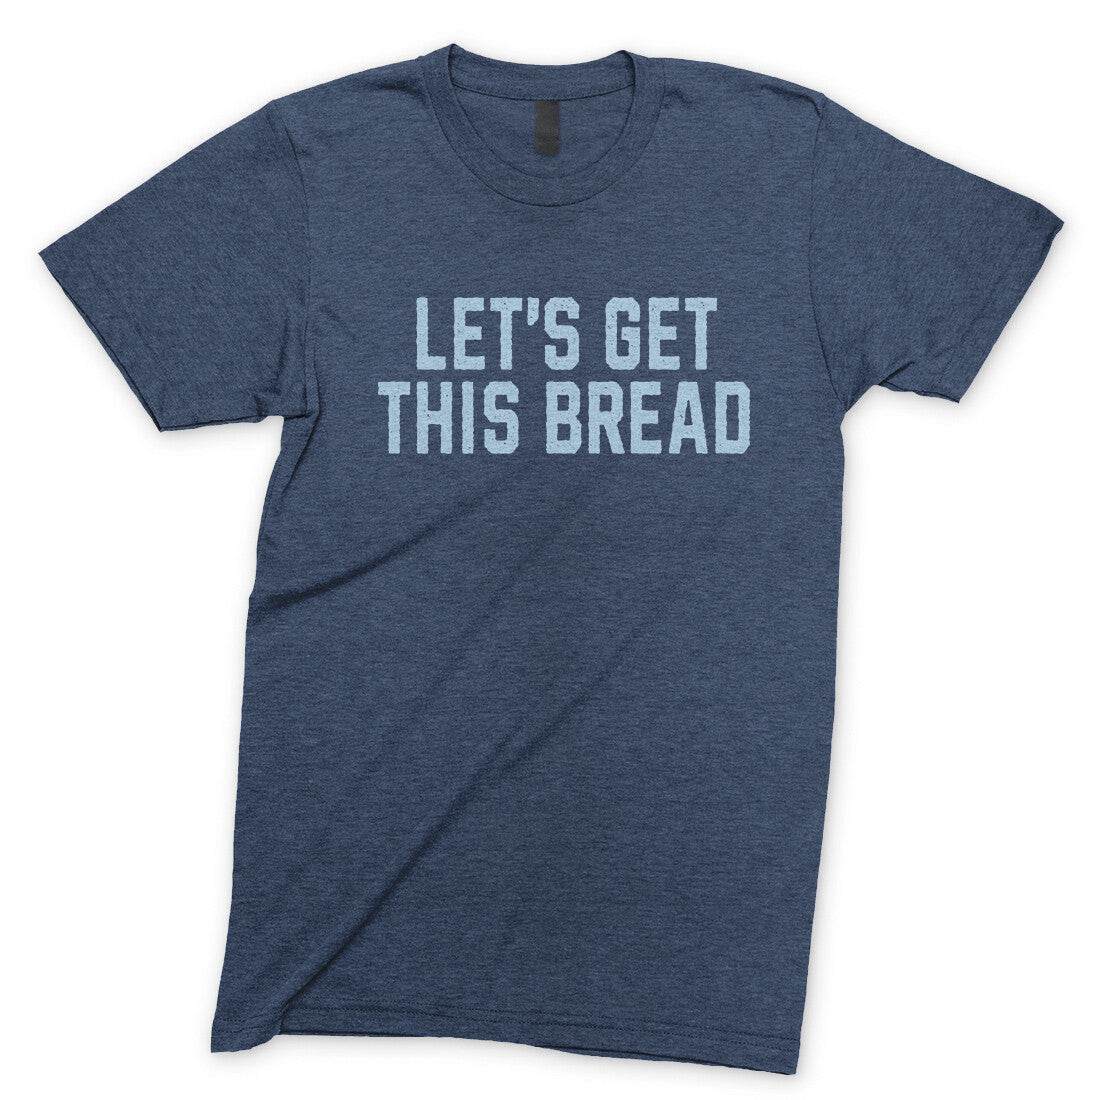 Let's Get This Bread in Navy Heather Color